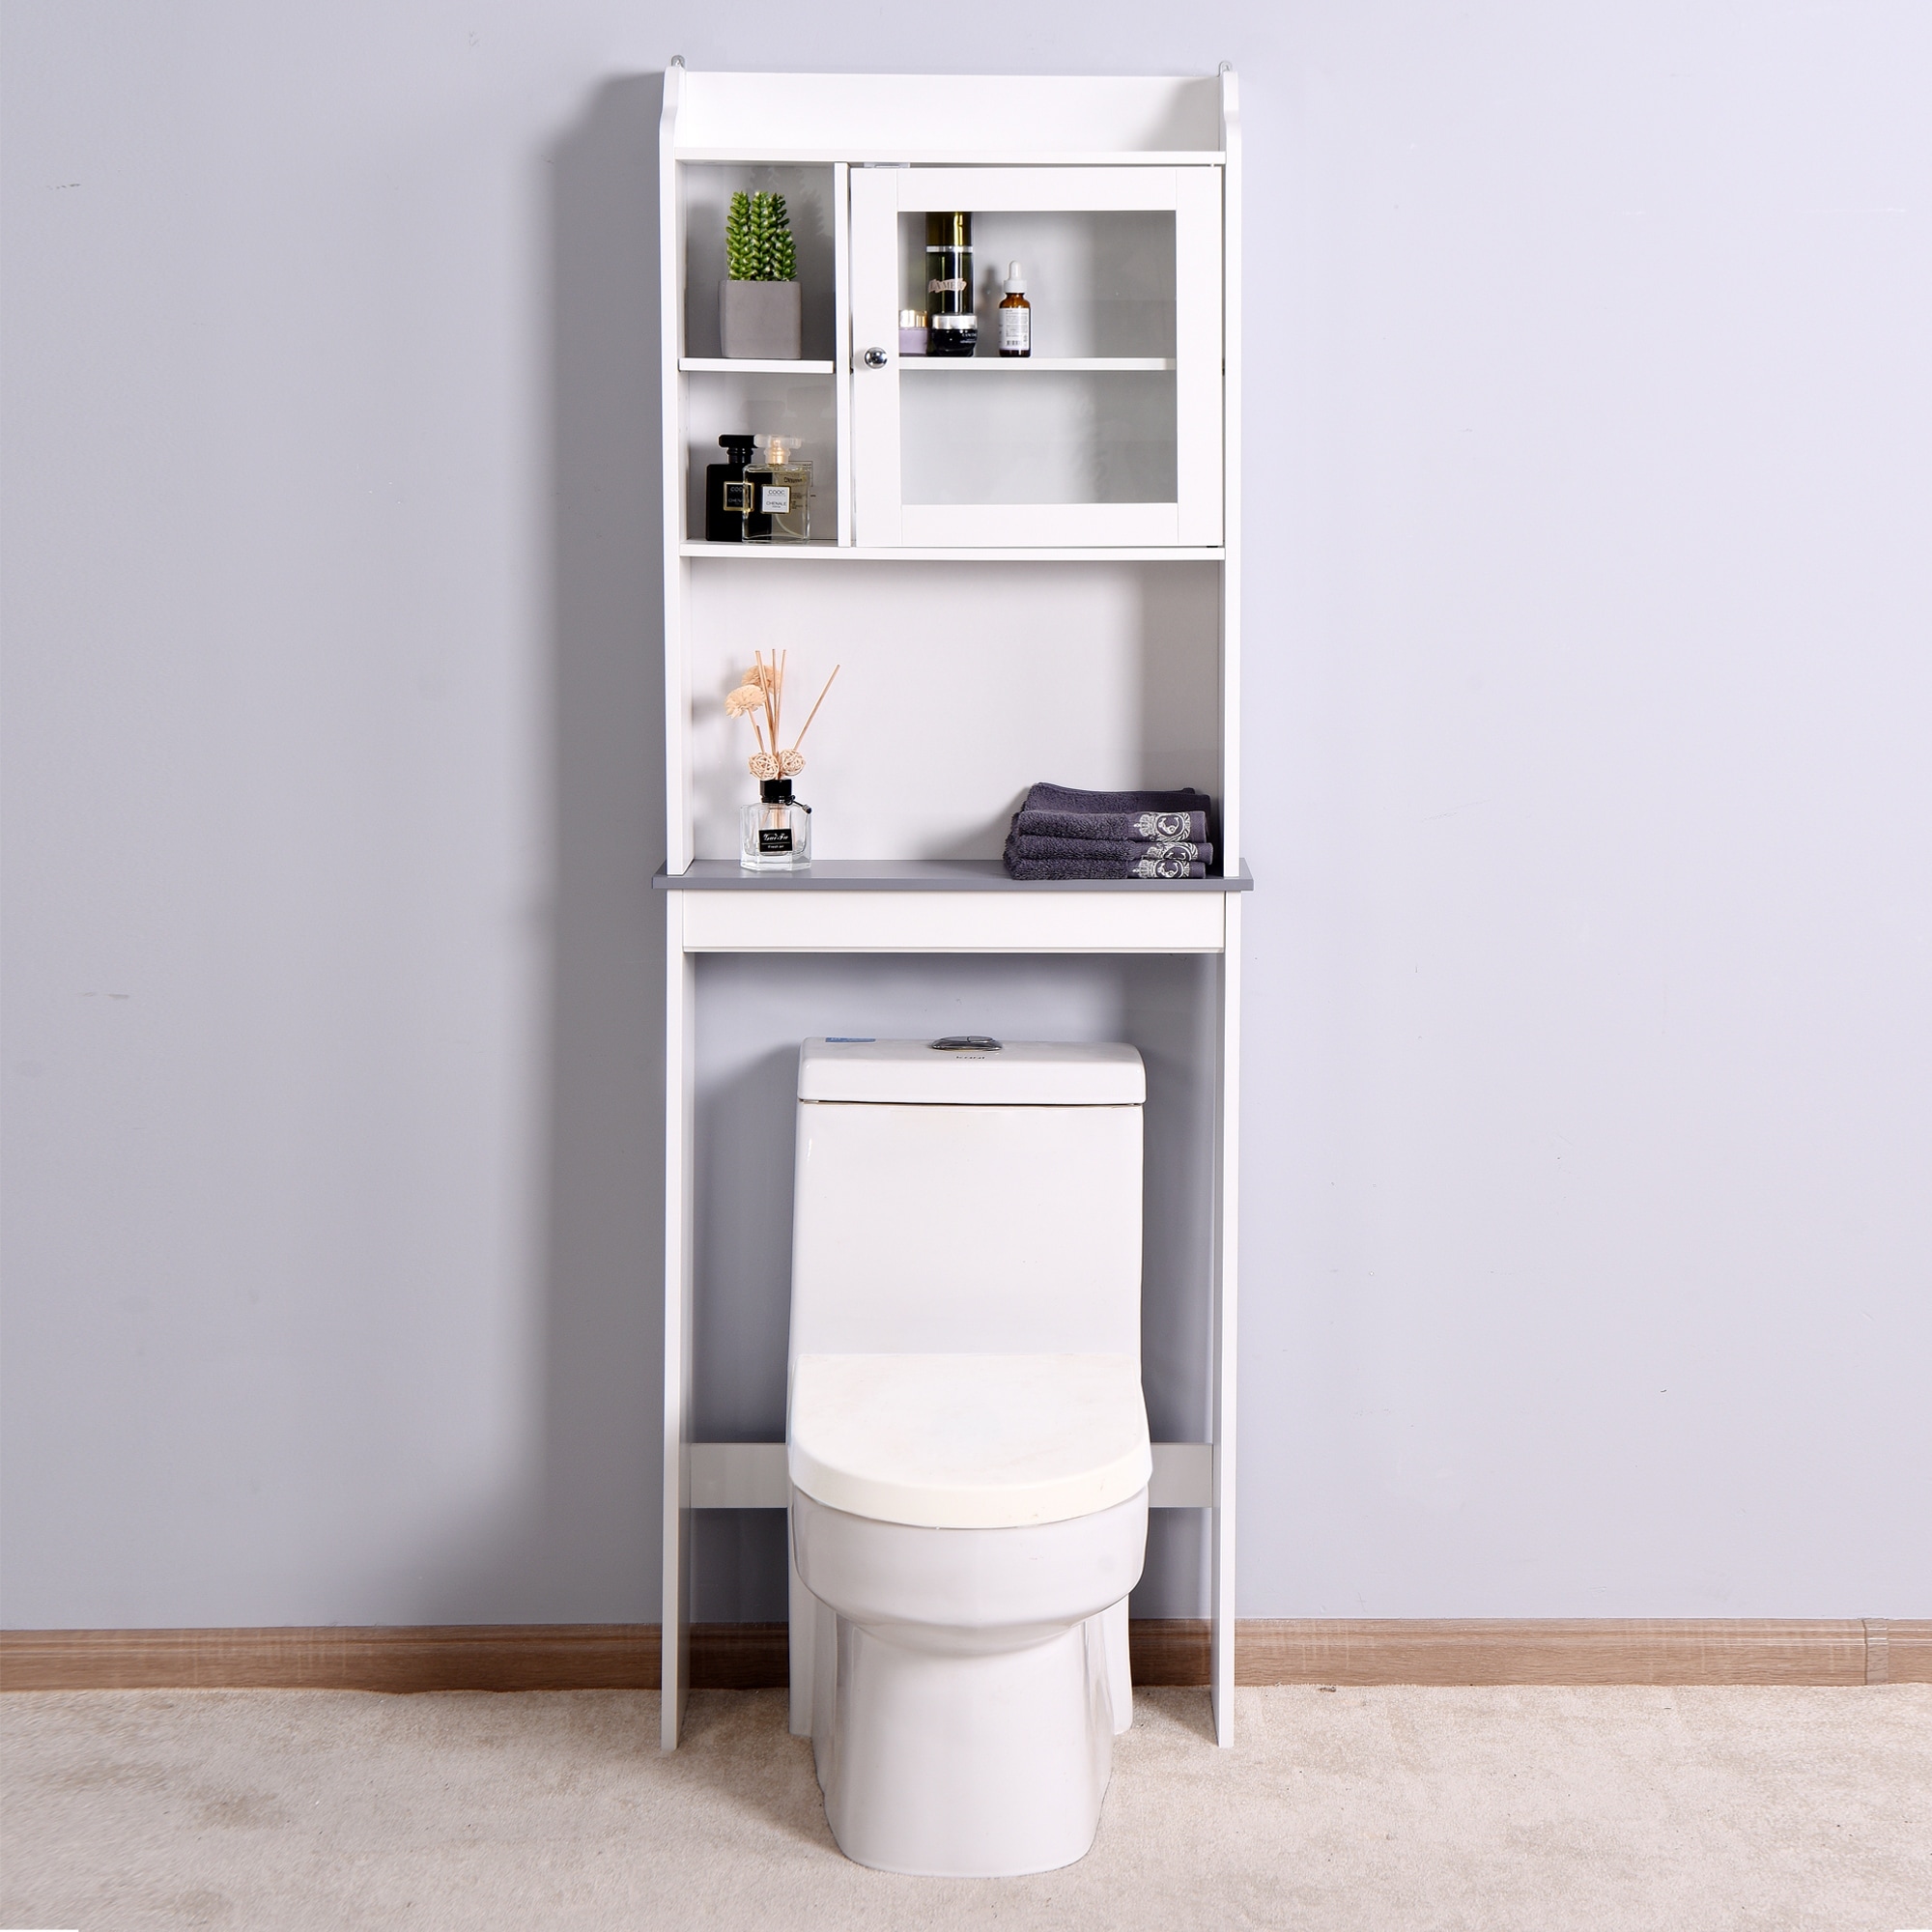 https://ak1.ostkcdn.com/images/products/is/images/direct/3147a606bf98570d1de100cd8af559e0daaf8ed0/White-Over-the-Toilet-Space-Saver-Wood-Bathroom-Storage-Cabinet-with-Shelves.jpg